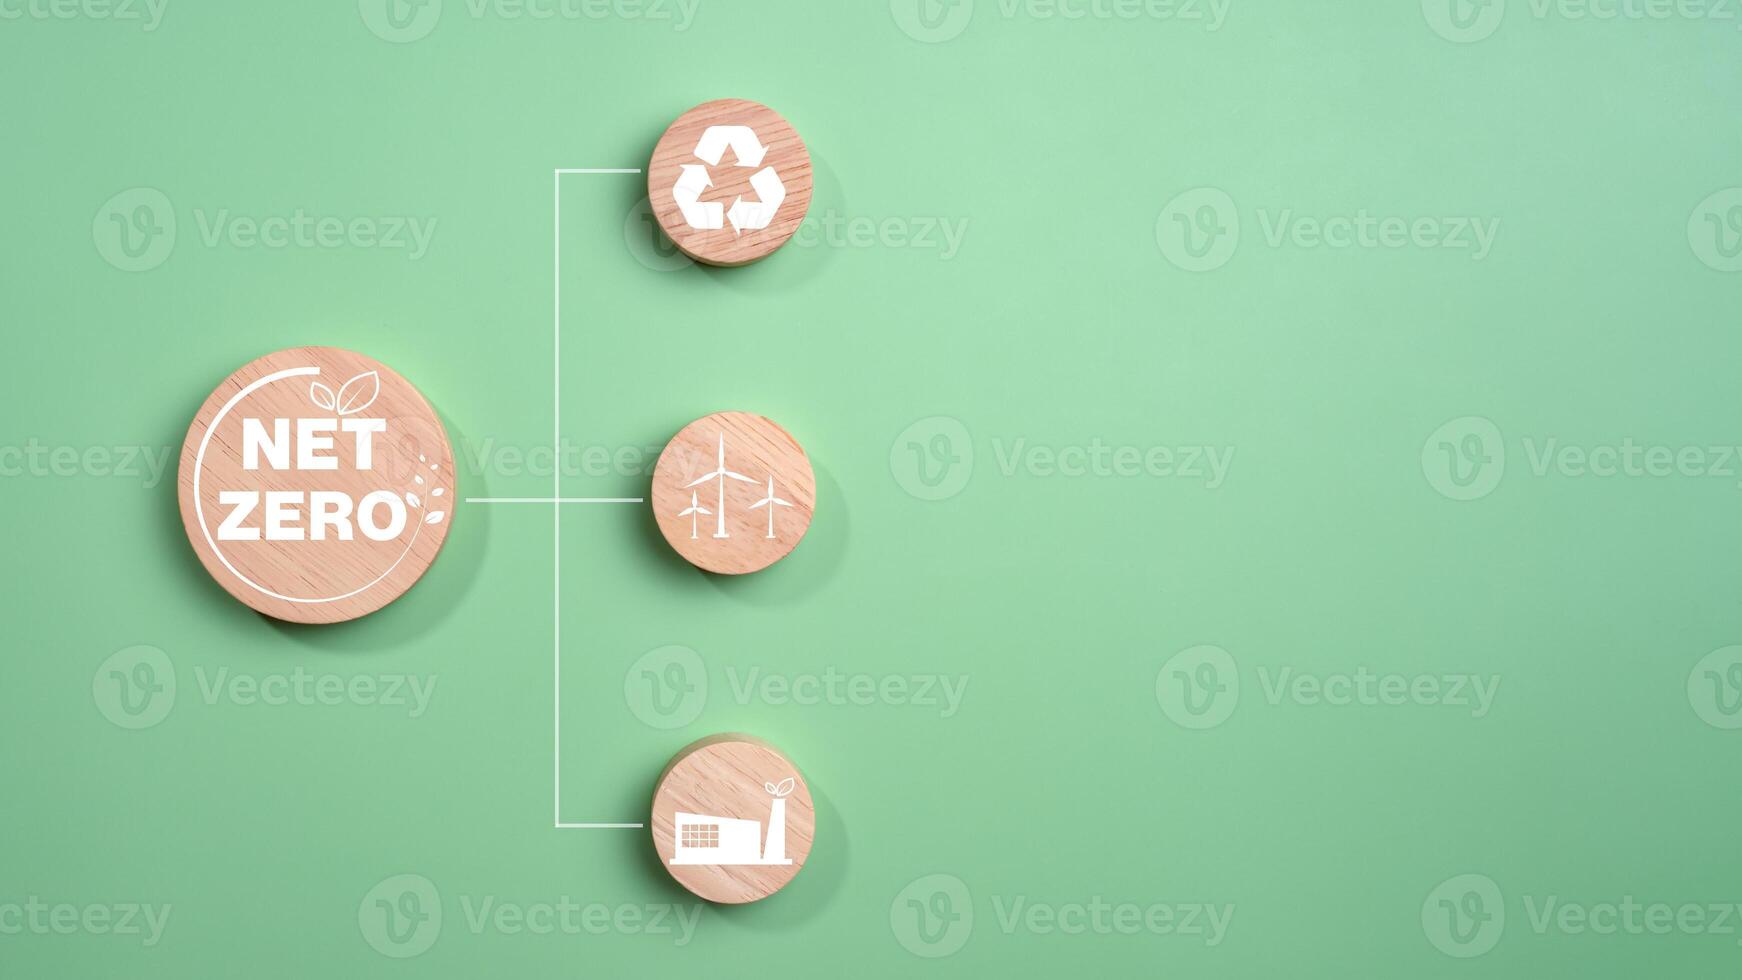 Circular wooden board with net zero icon in 2050 on green background, Net zero by 2050, Carbon neutral, Net zero green house gas emissions target, Climate neutral long term strategy, No toxic gases. photo